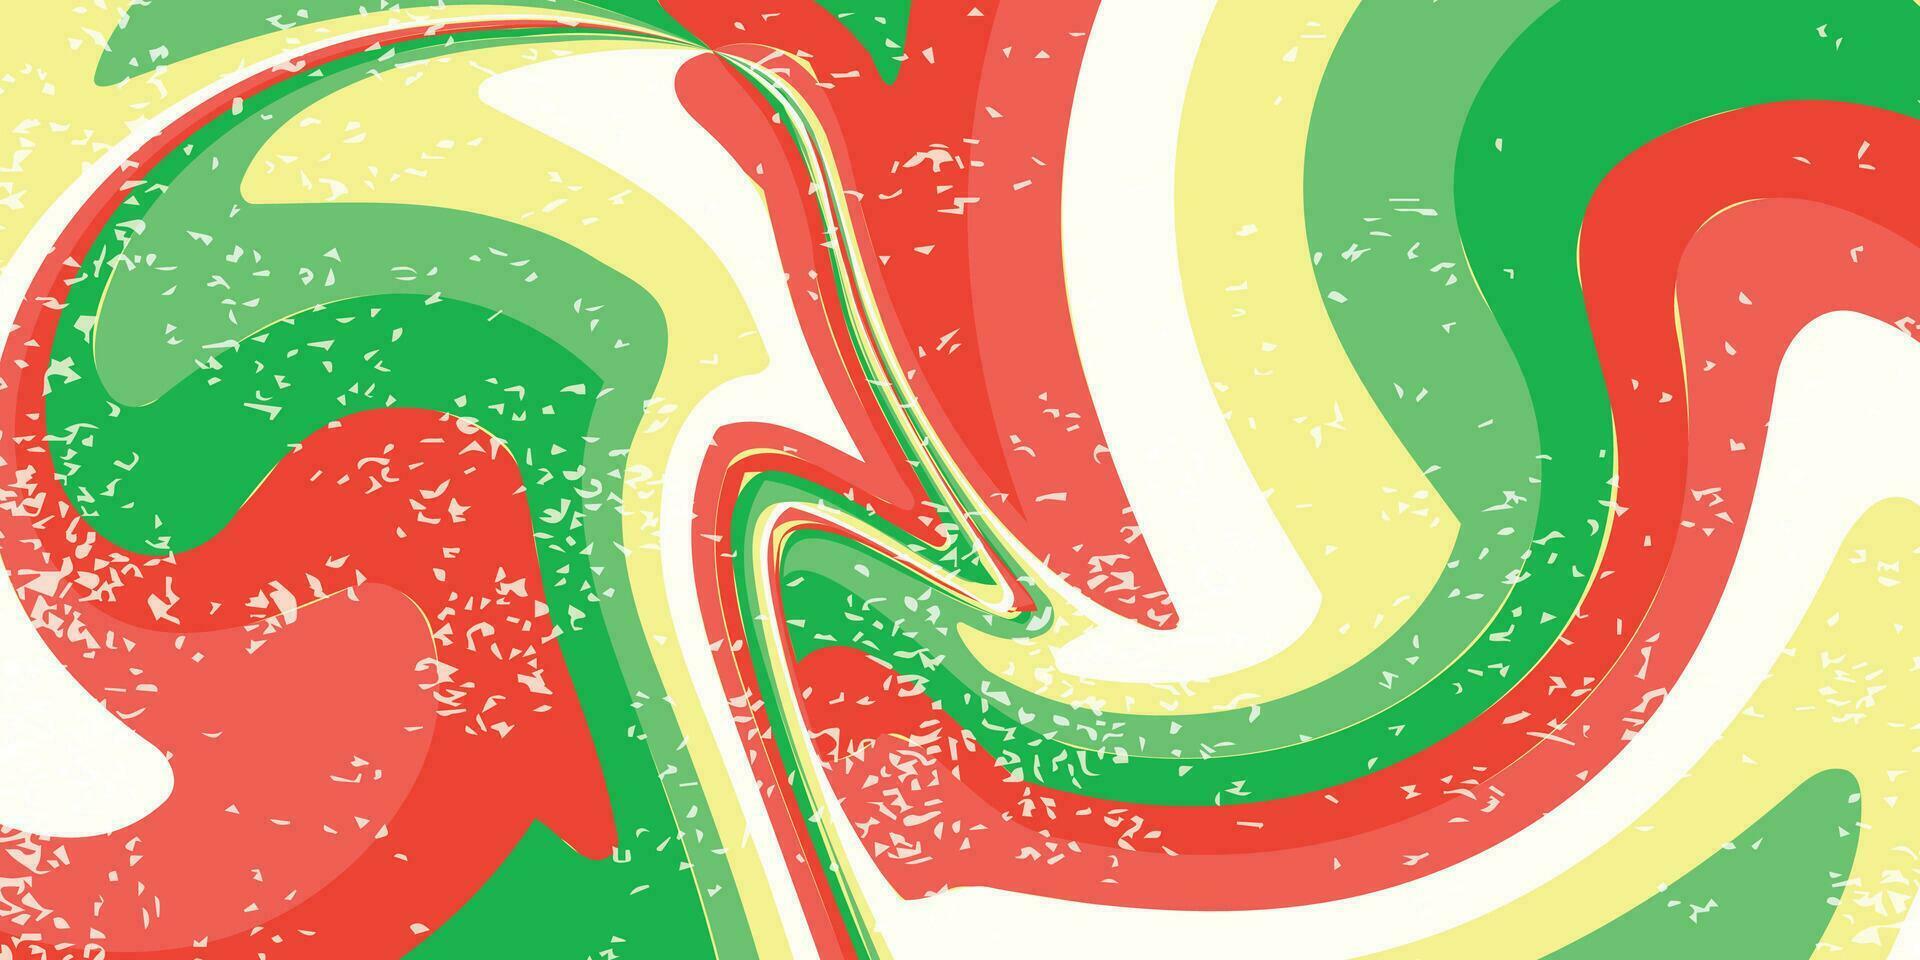 Abstract vector background design with Christmas theme and vintage texture.